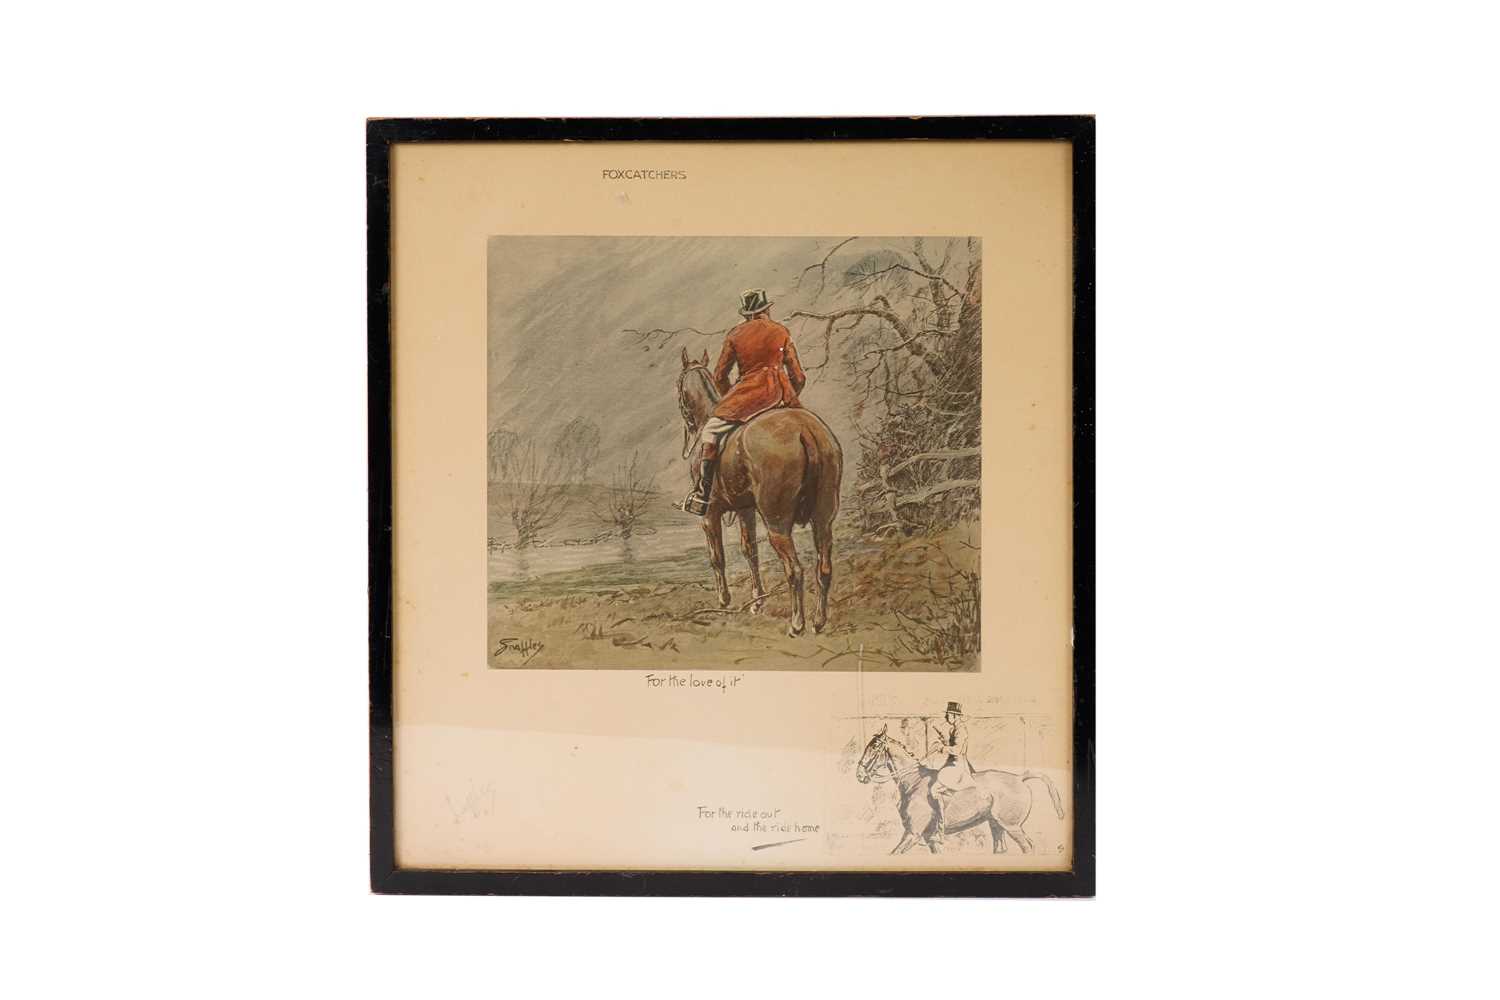 "Snaffles" Charles Johnson Payne - Foxcatchers | colour offset lithograph